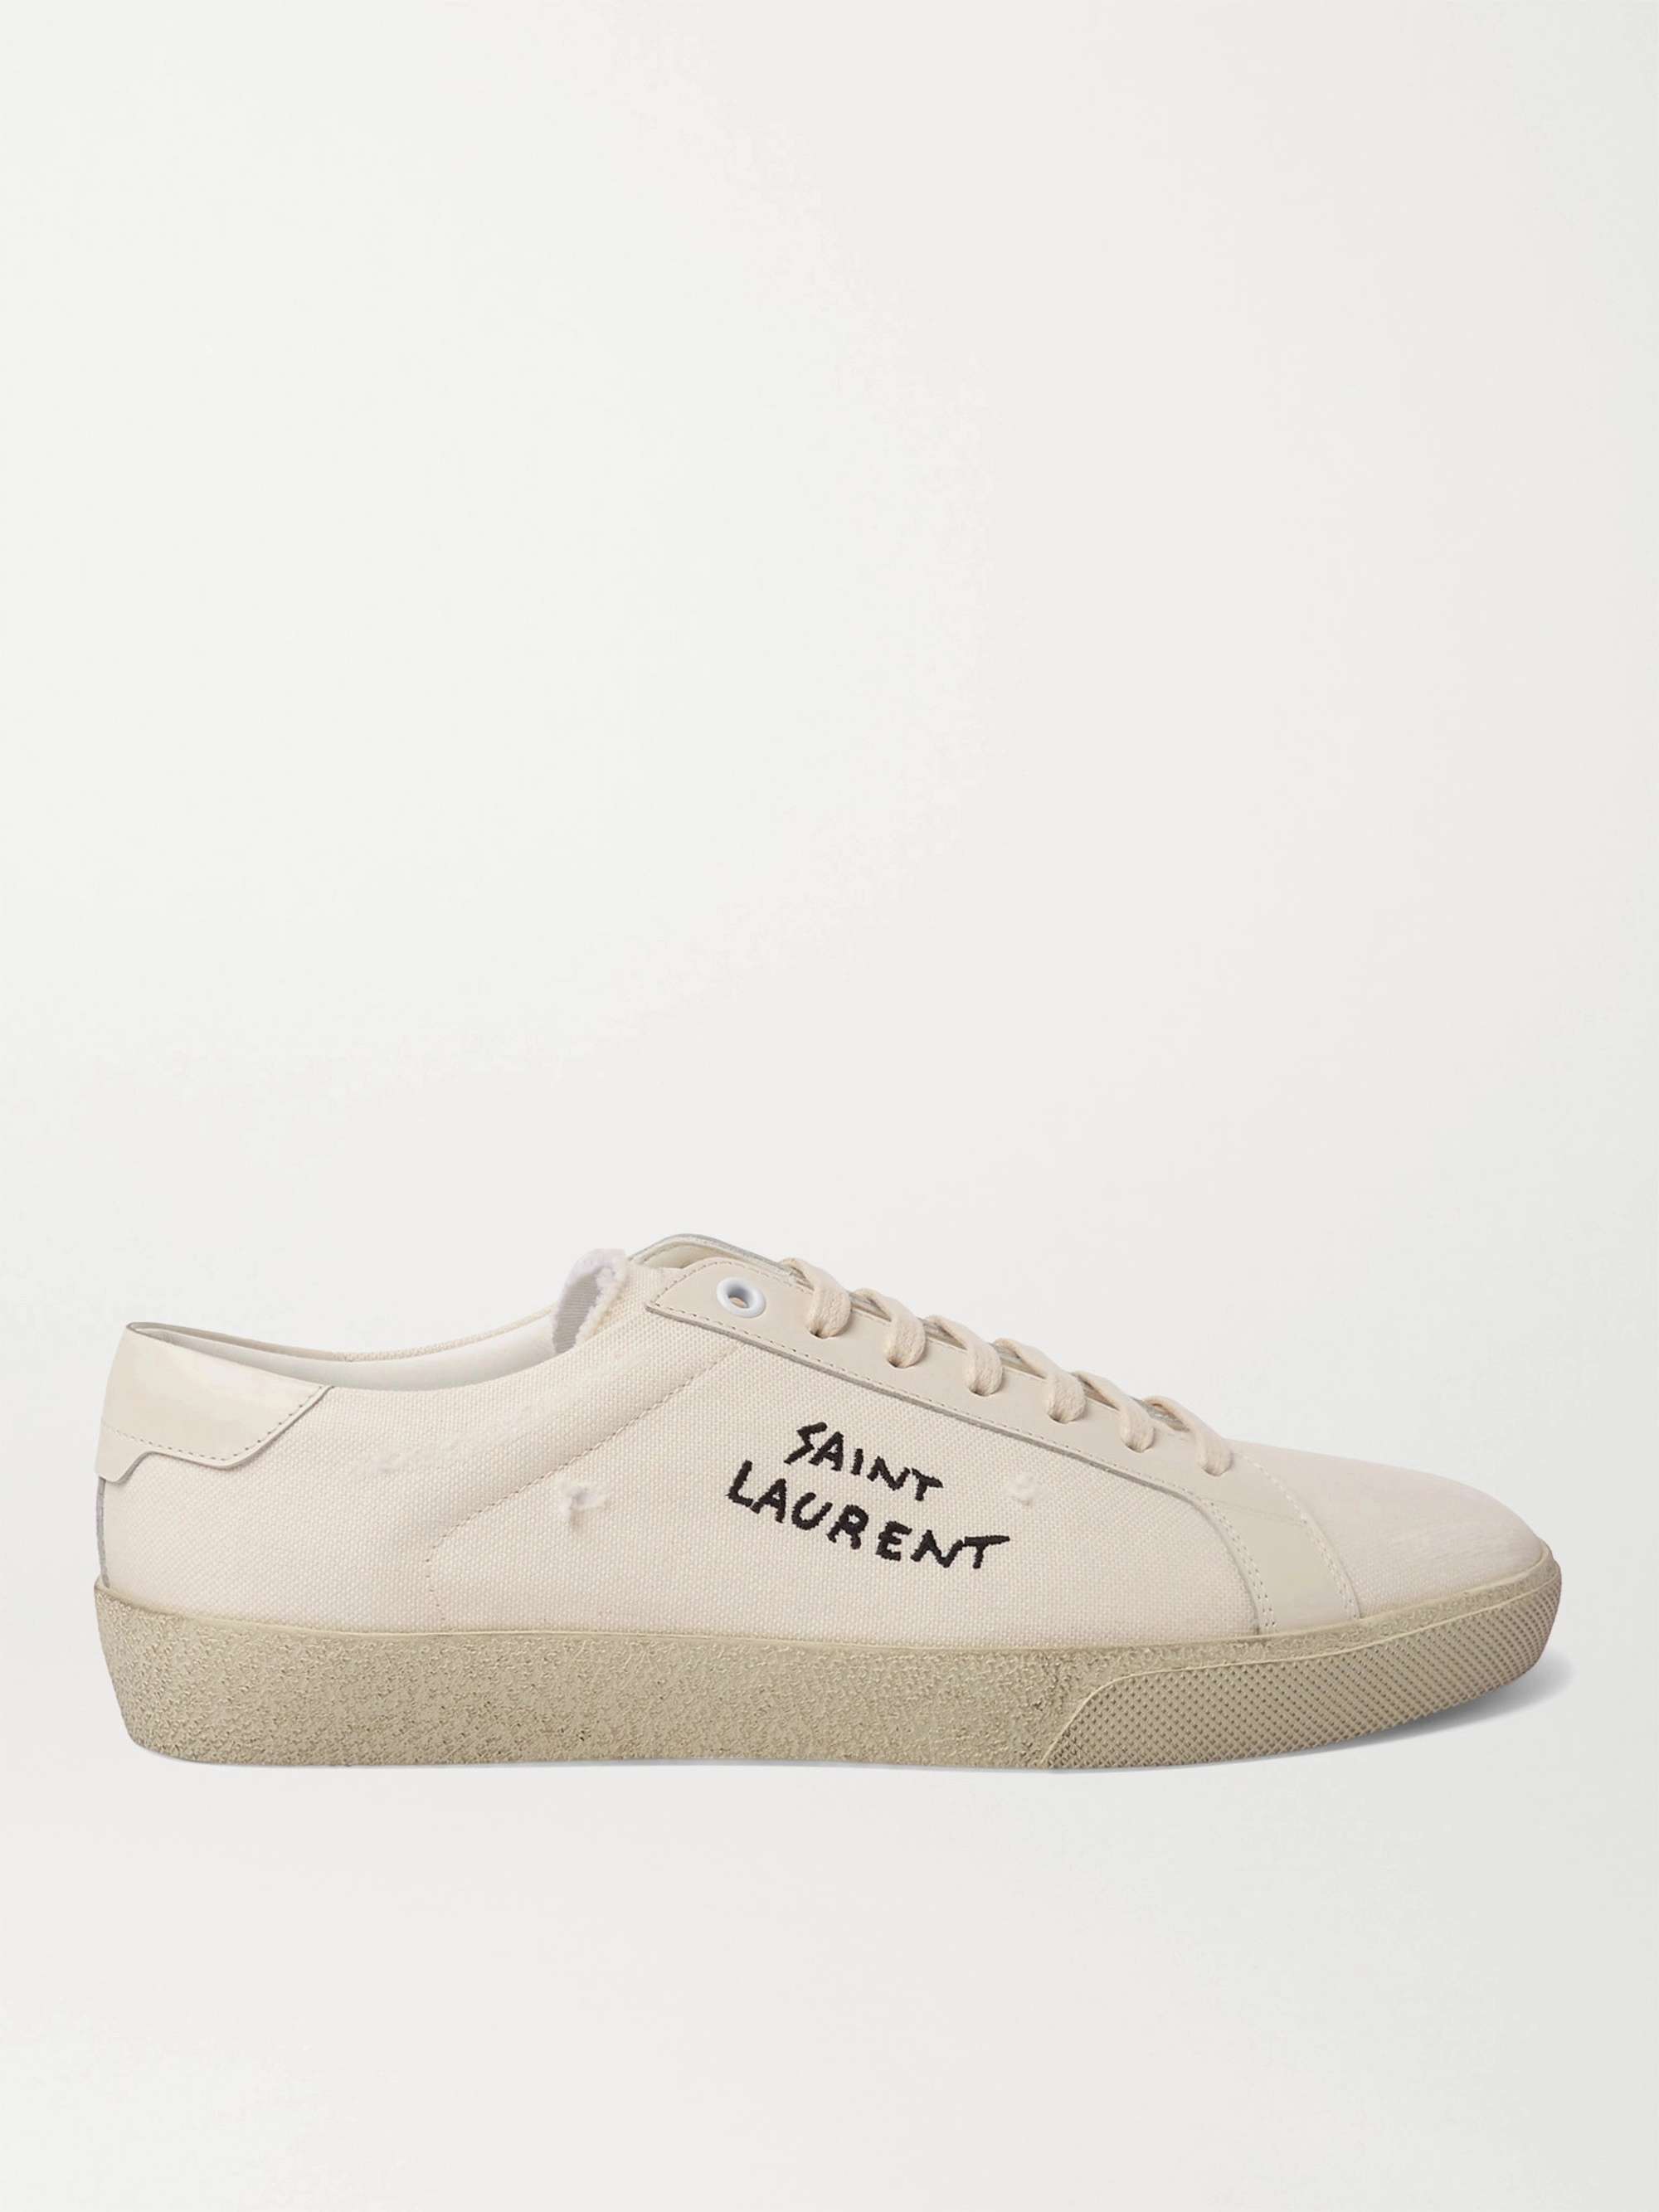 SAINT LAURENT SL/06 Court Classic Leather-Trimmed Logo-Embroidered  Distressed Canvas Sneakers | MR PORTER